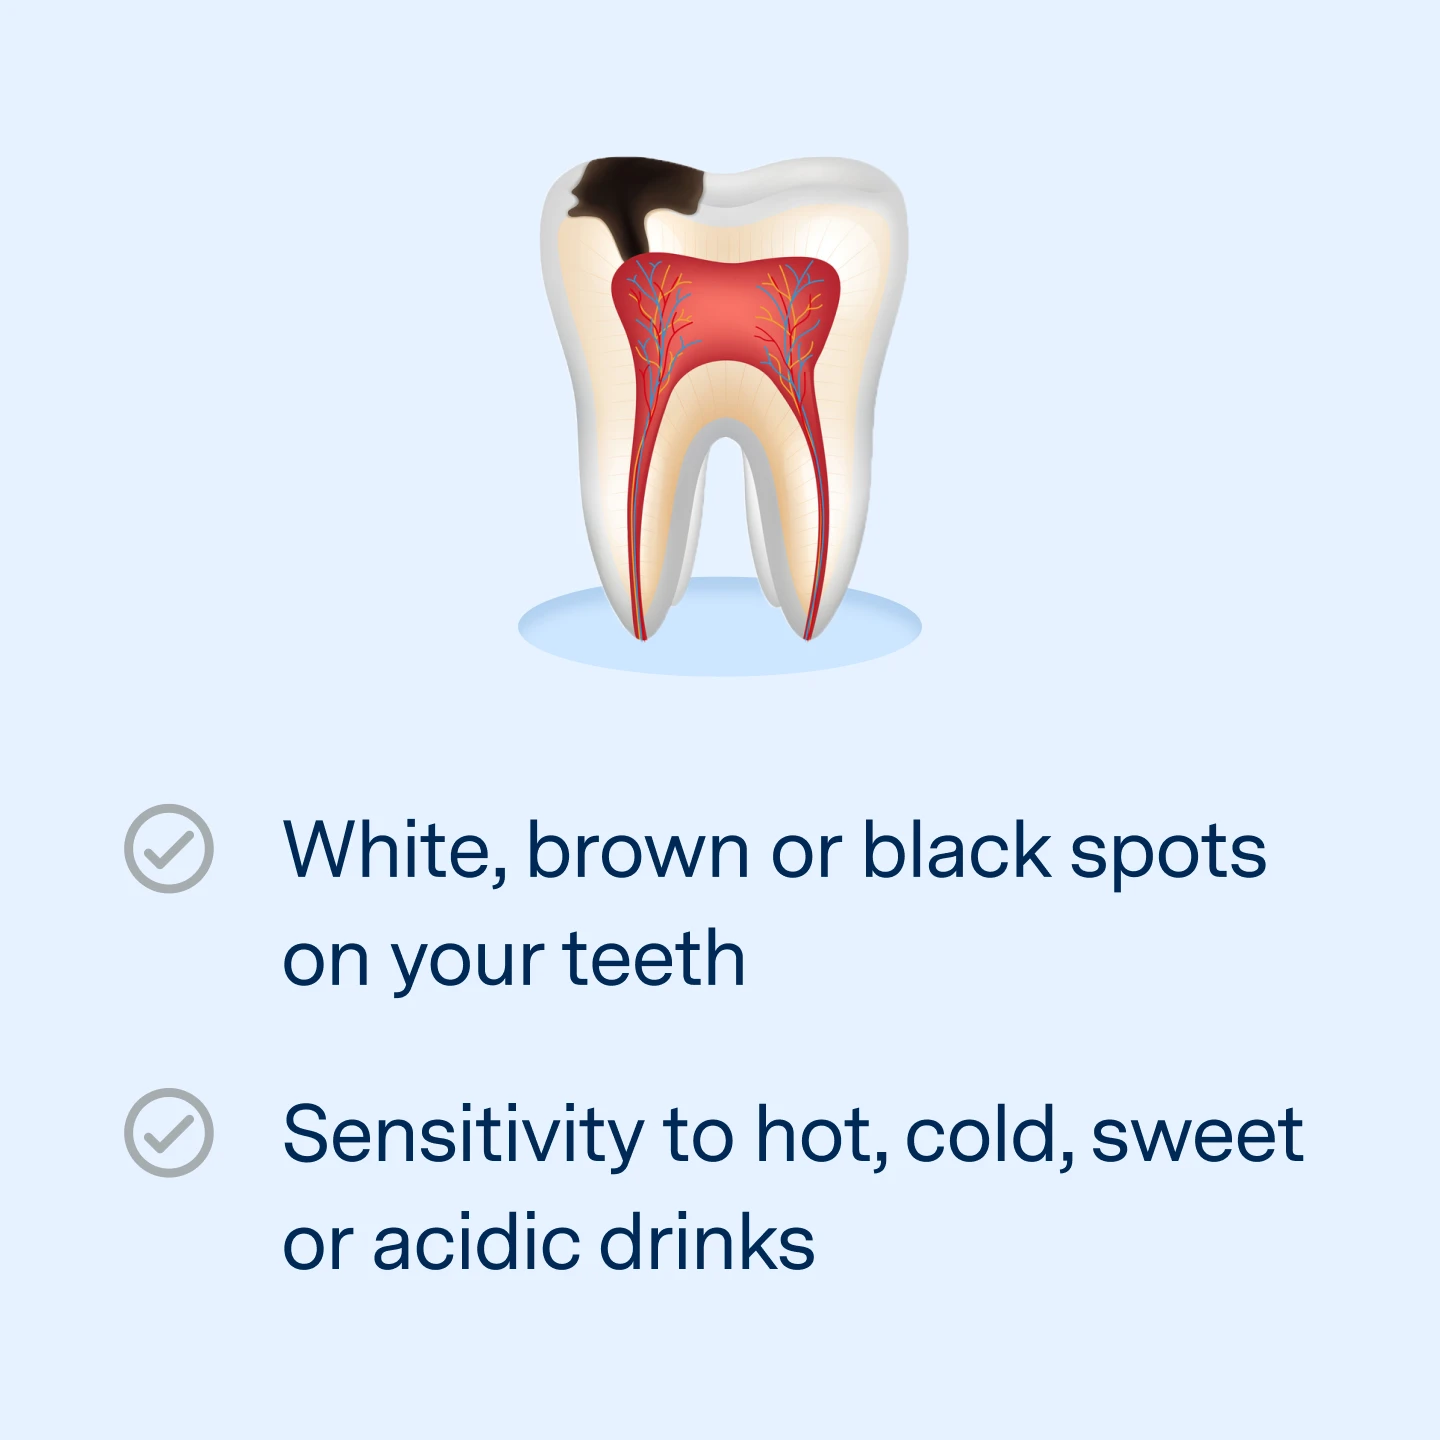 Symptoms: White, brown, or black spots on your teeth. Sensitivity to hot, cold, sweet, or acidic drinks. 